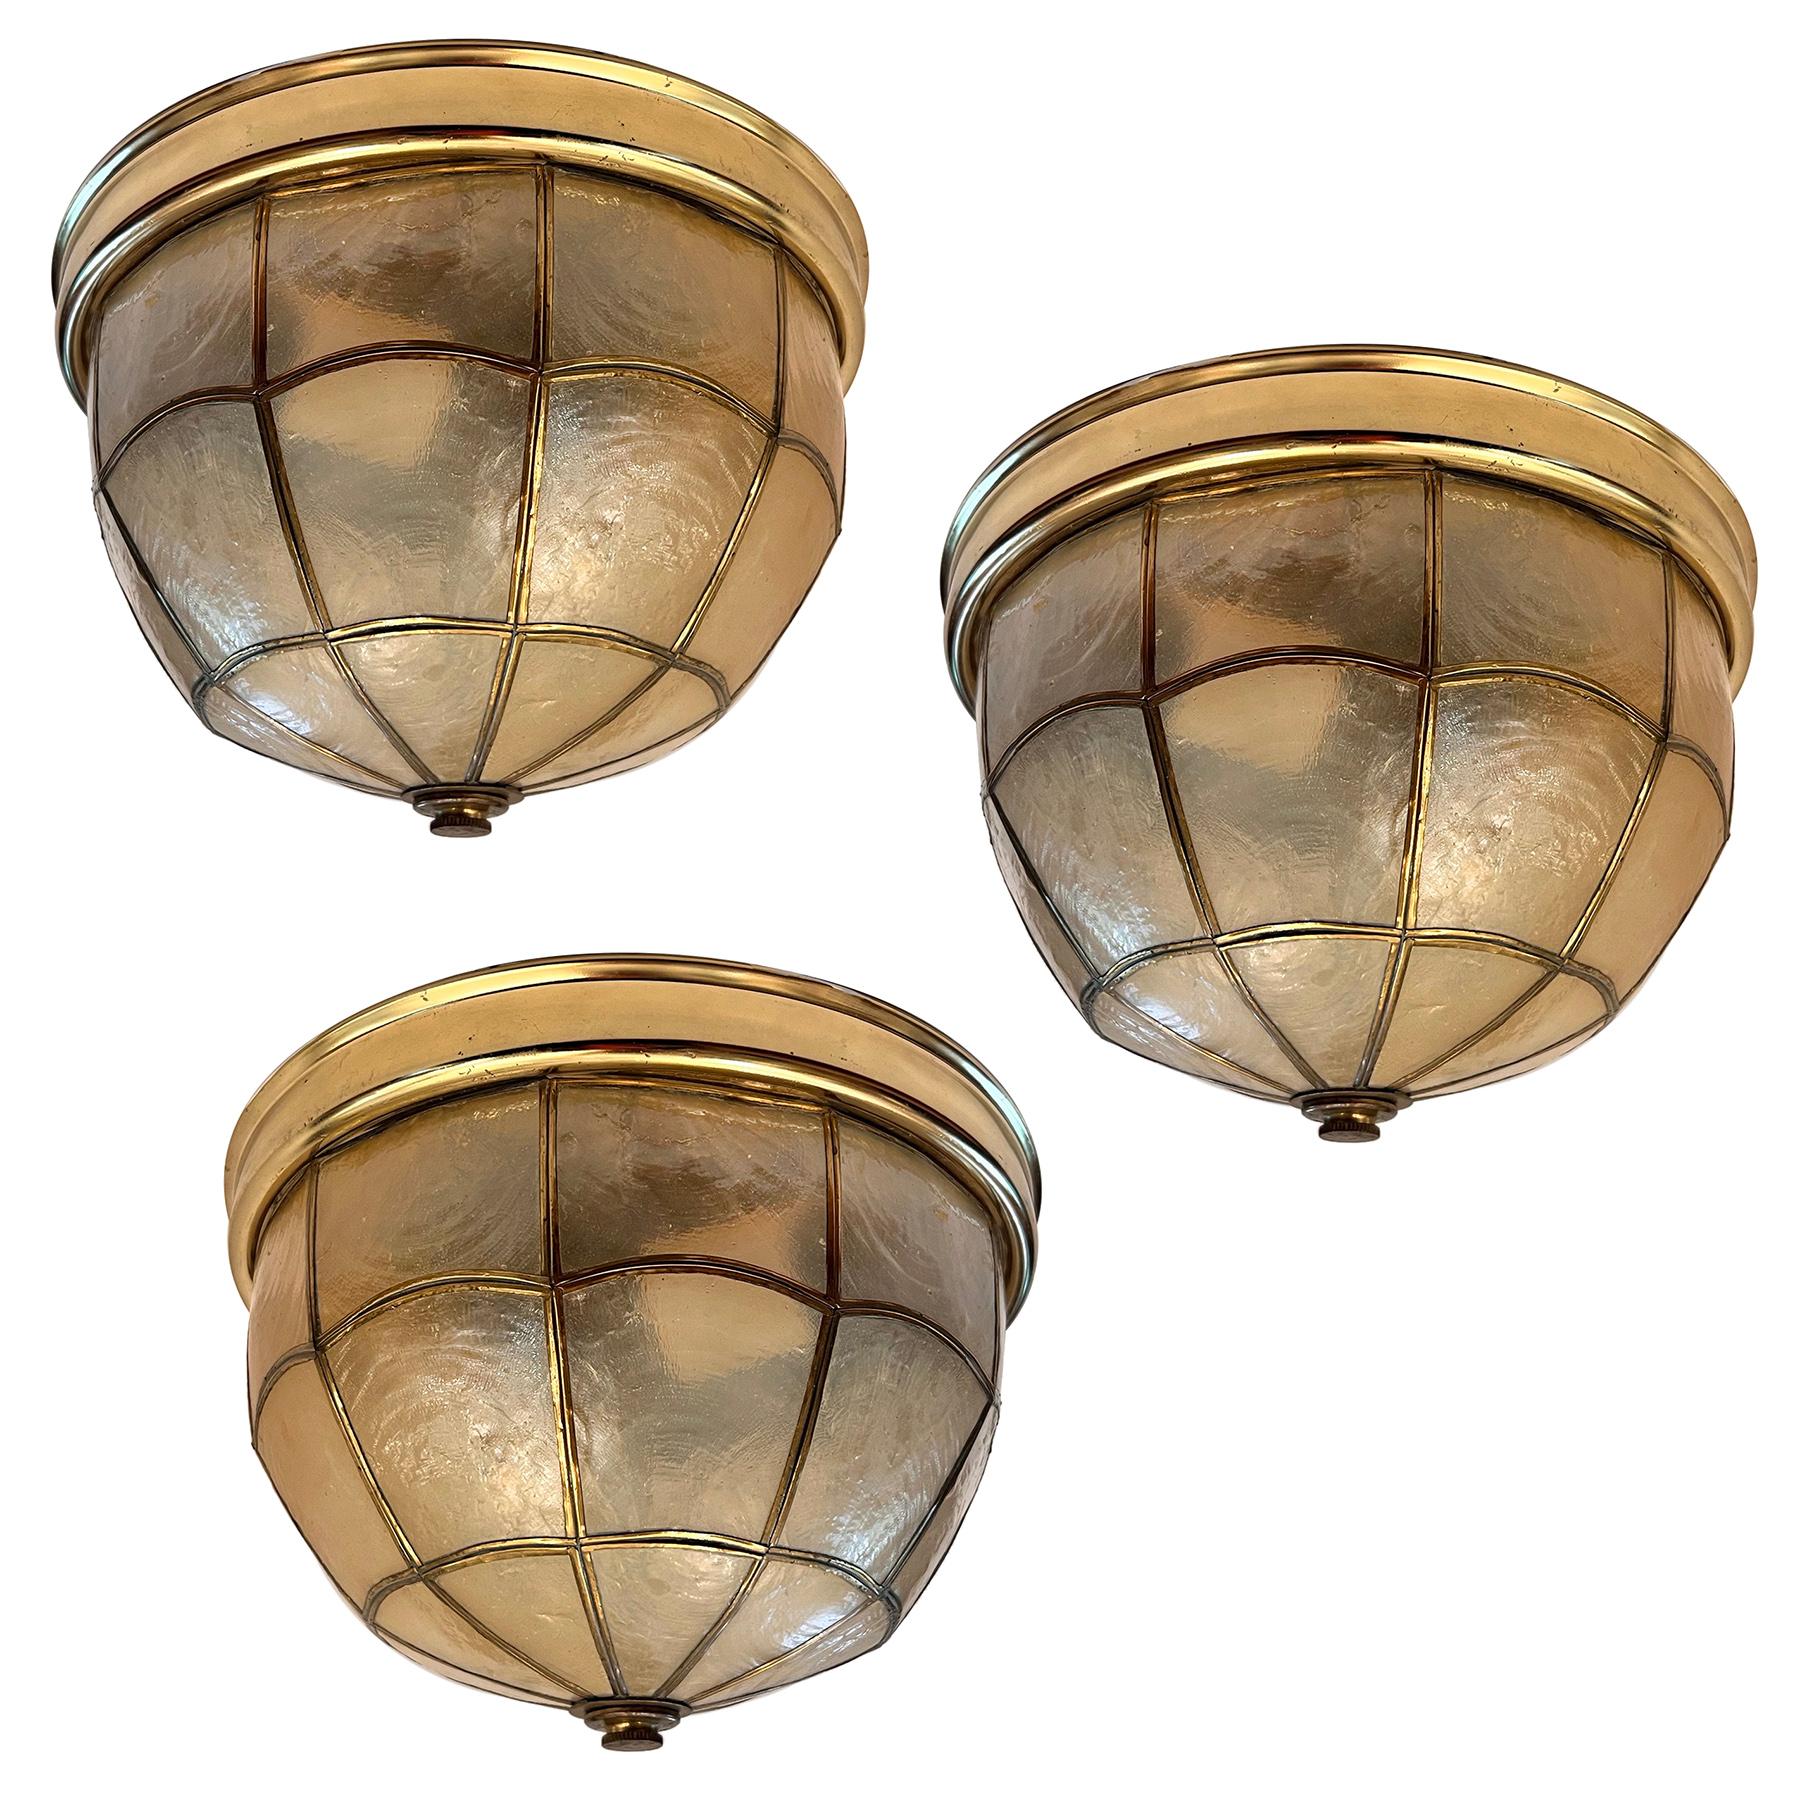 A set of three circa 1940's French capiz fixtures. Sold individually.

Measurements:
Height: 5.75